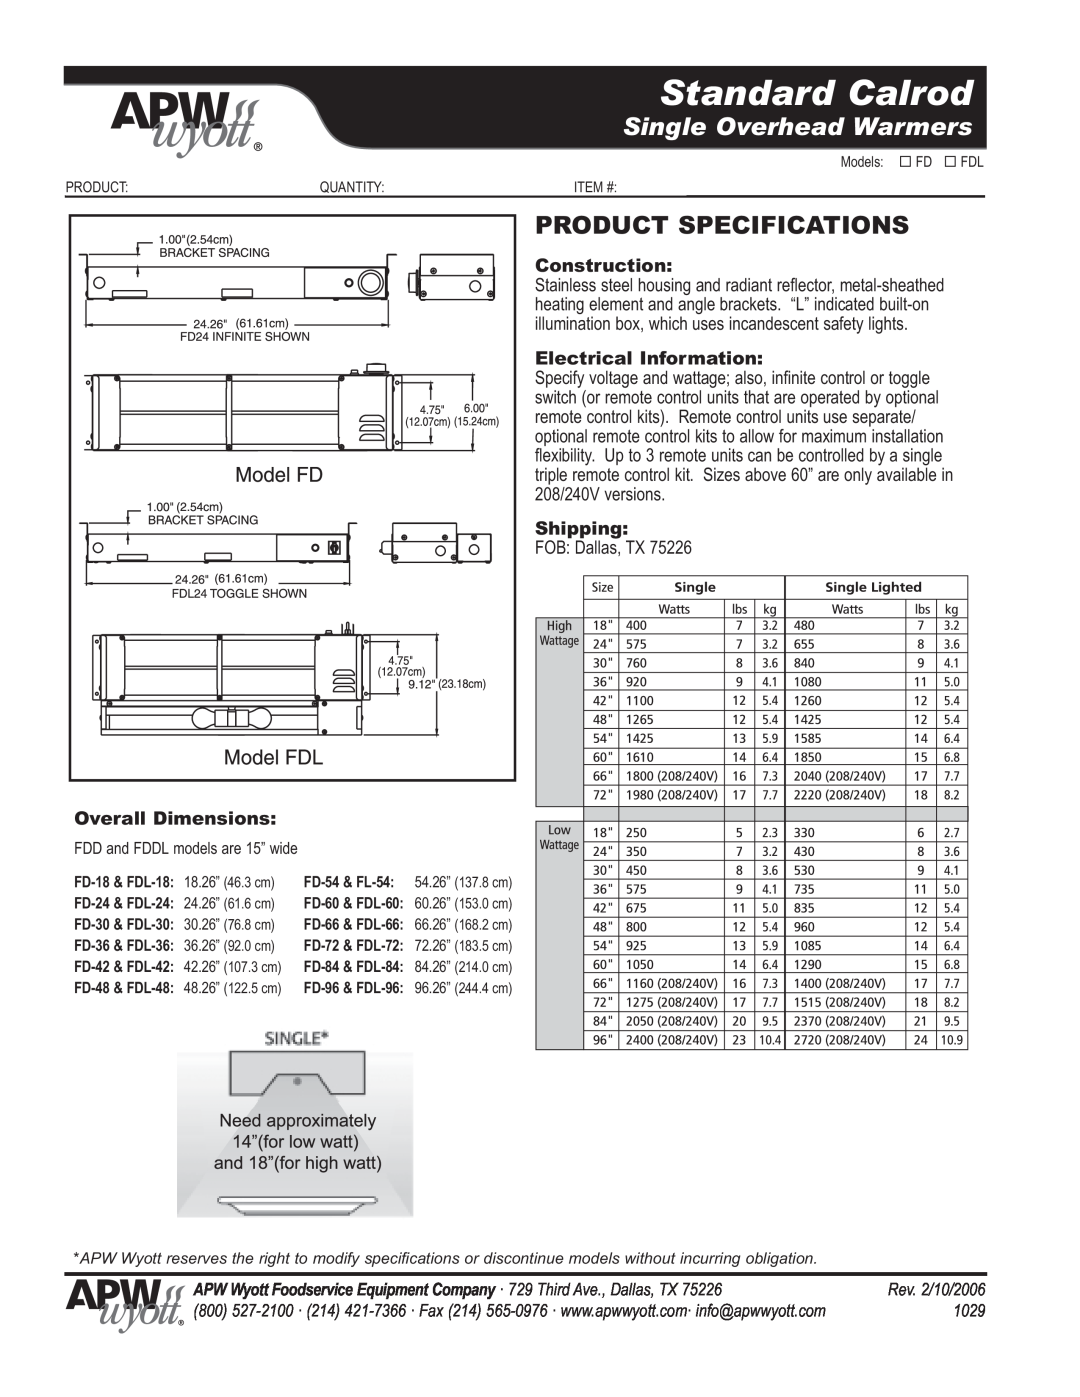 APW Wyott FDL Product Specifications, Standard Calrod, Single Overhead Warmers, Construction, Electrical Information 